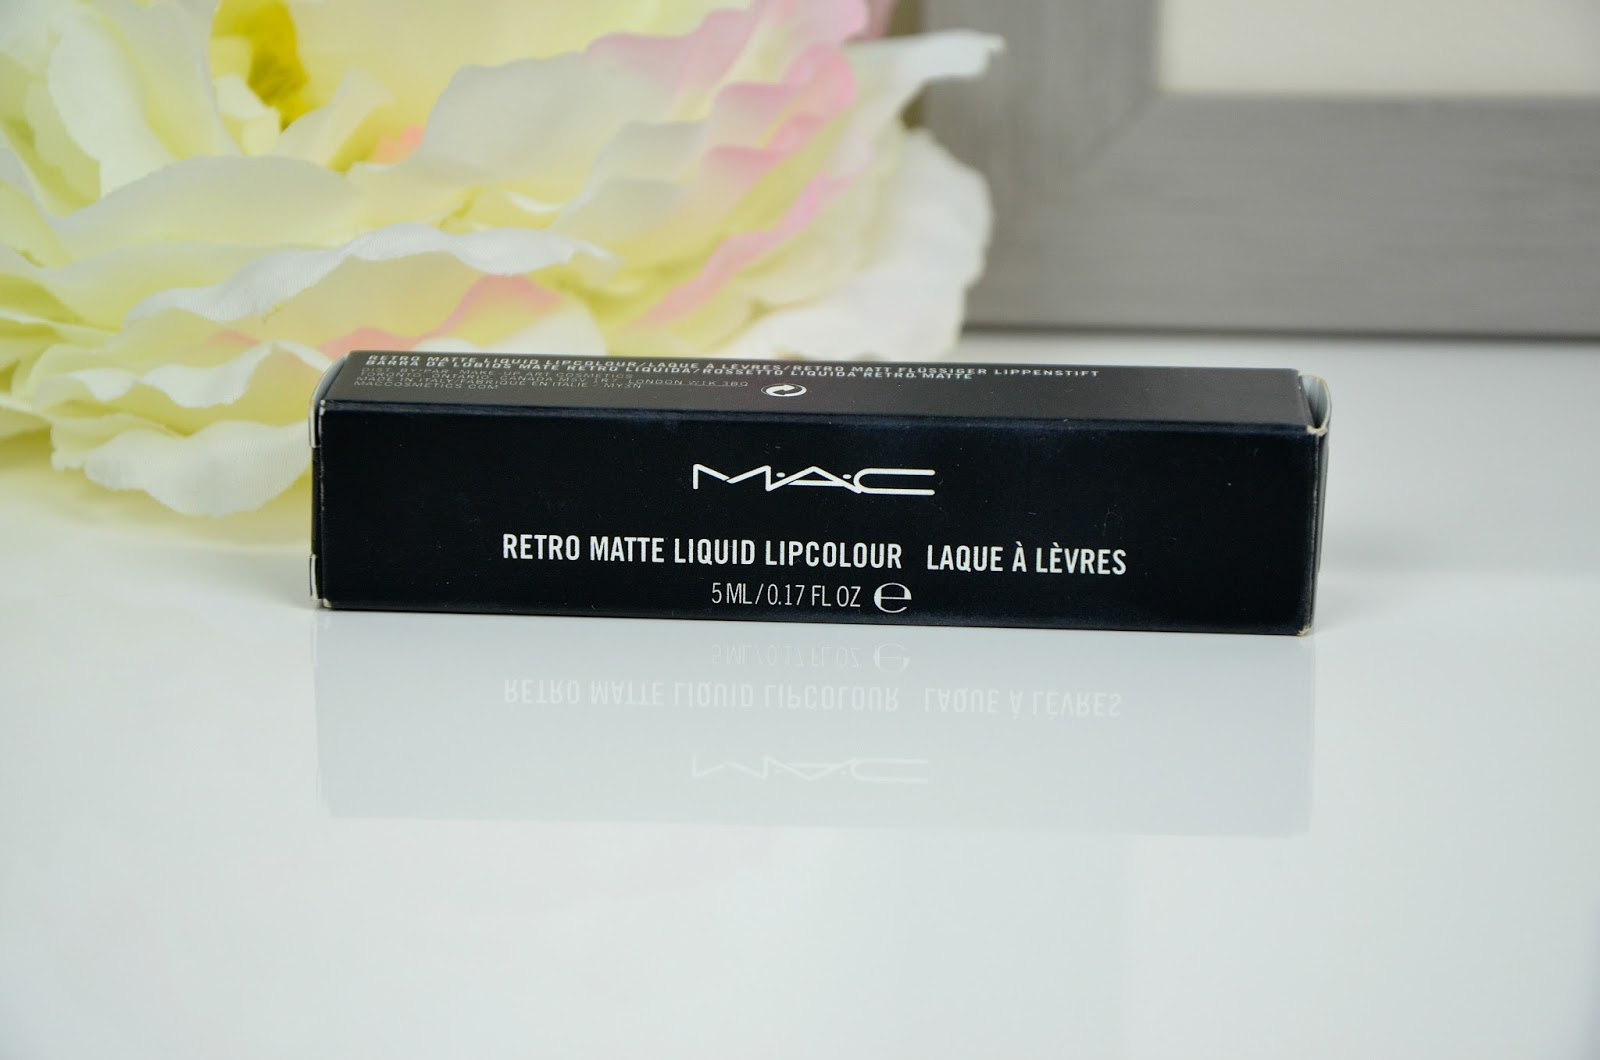 Retro matte liquid lipcolour MAC Oh, Lady review and swatch